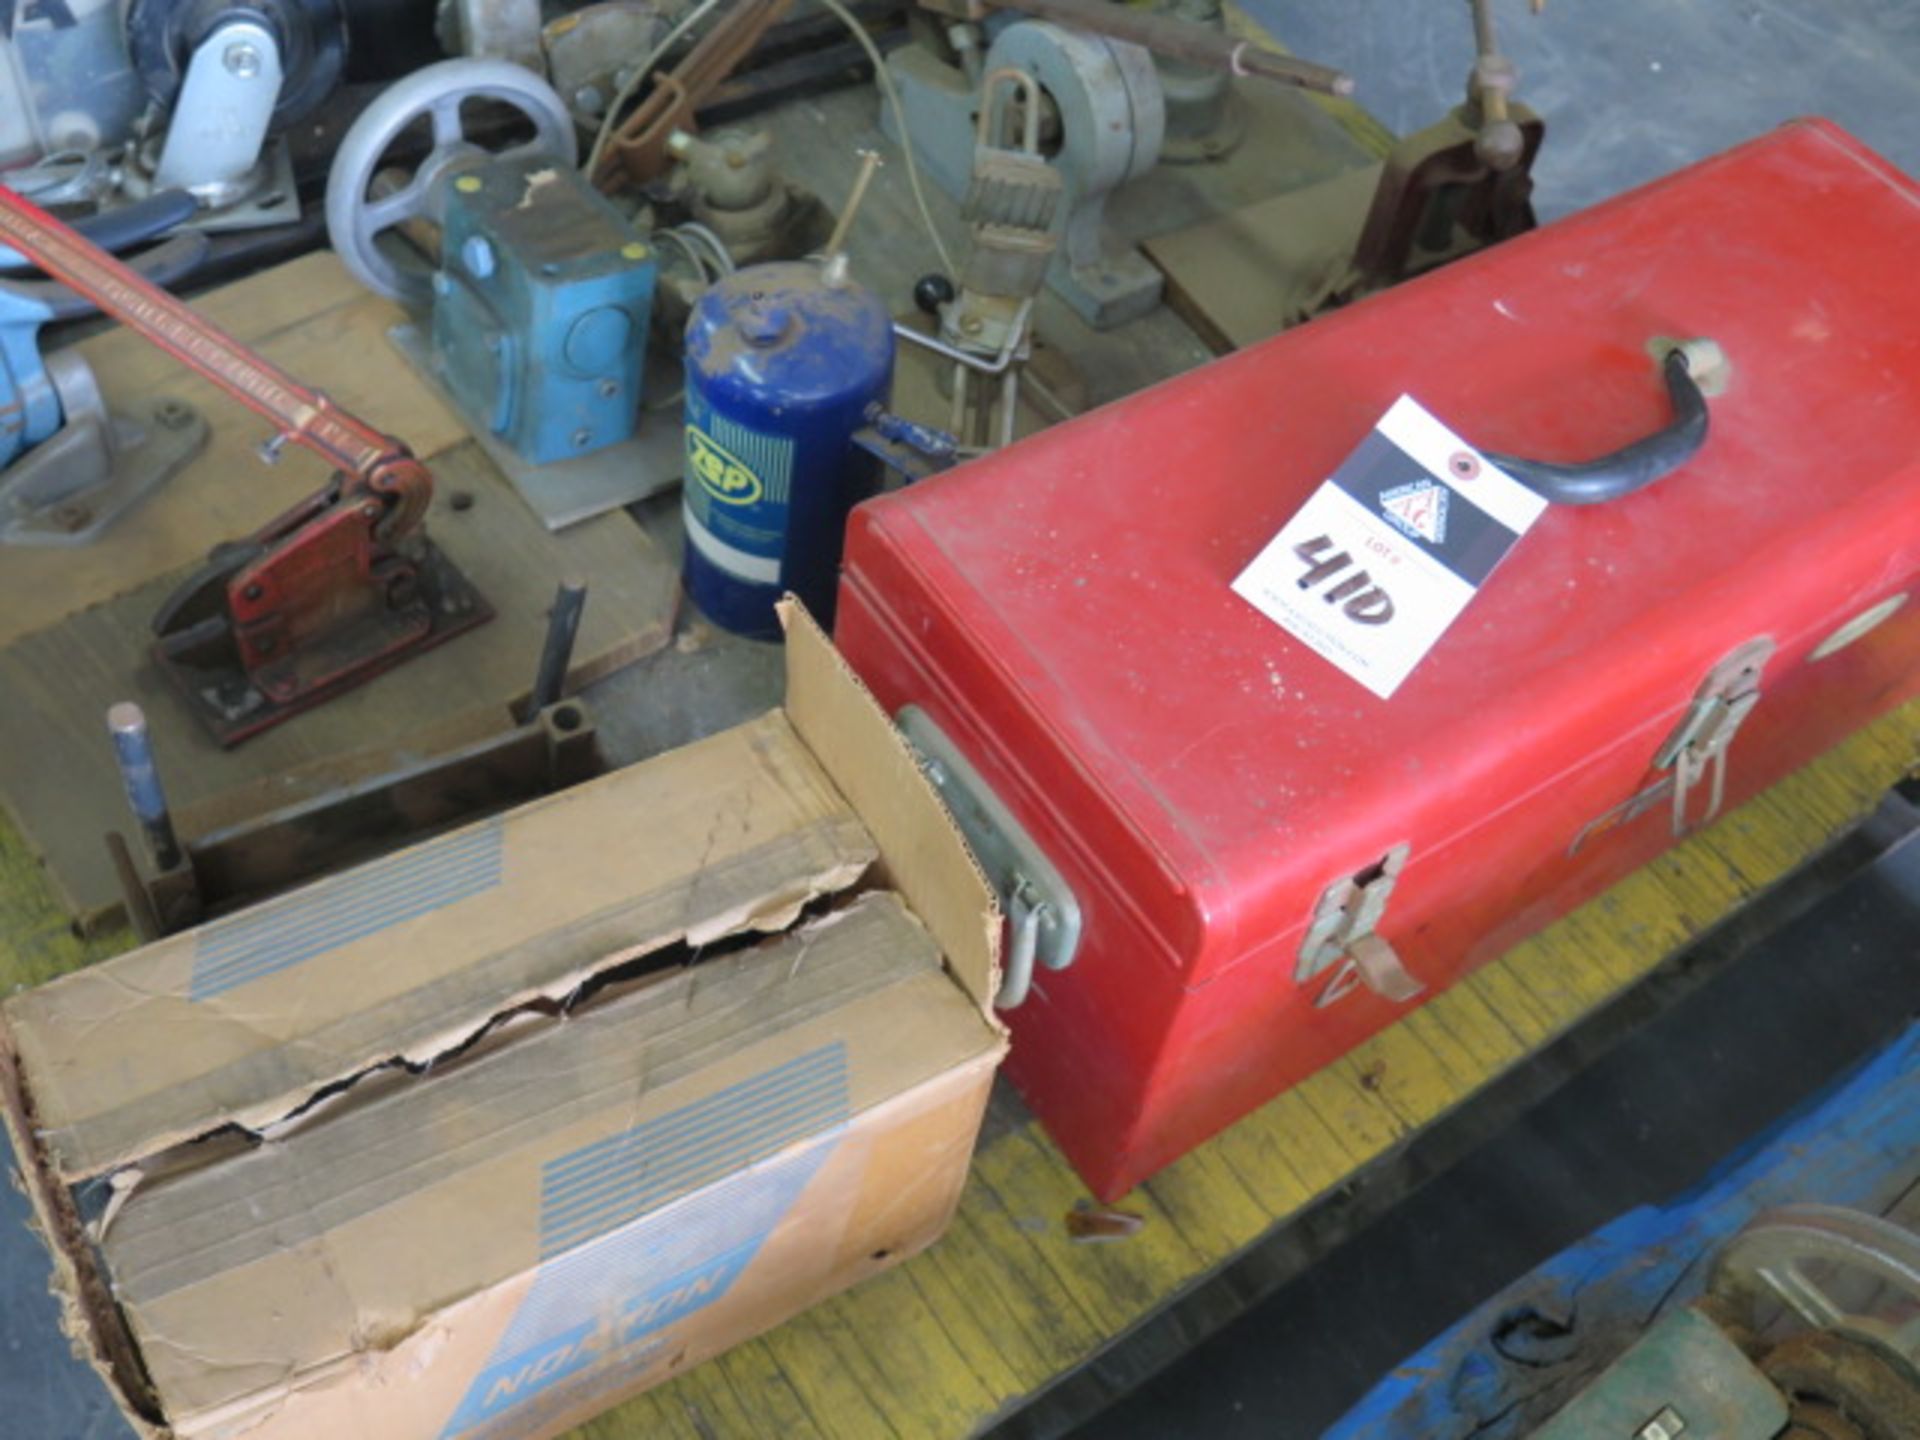 Misc Punches, Shears, benders, Tool Box, Grinding Wheels amd Misc (1-Pallet), SOLD AS IS - Image 7 of 7